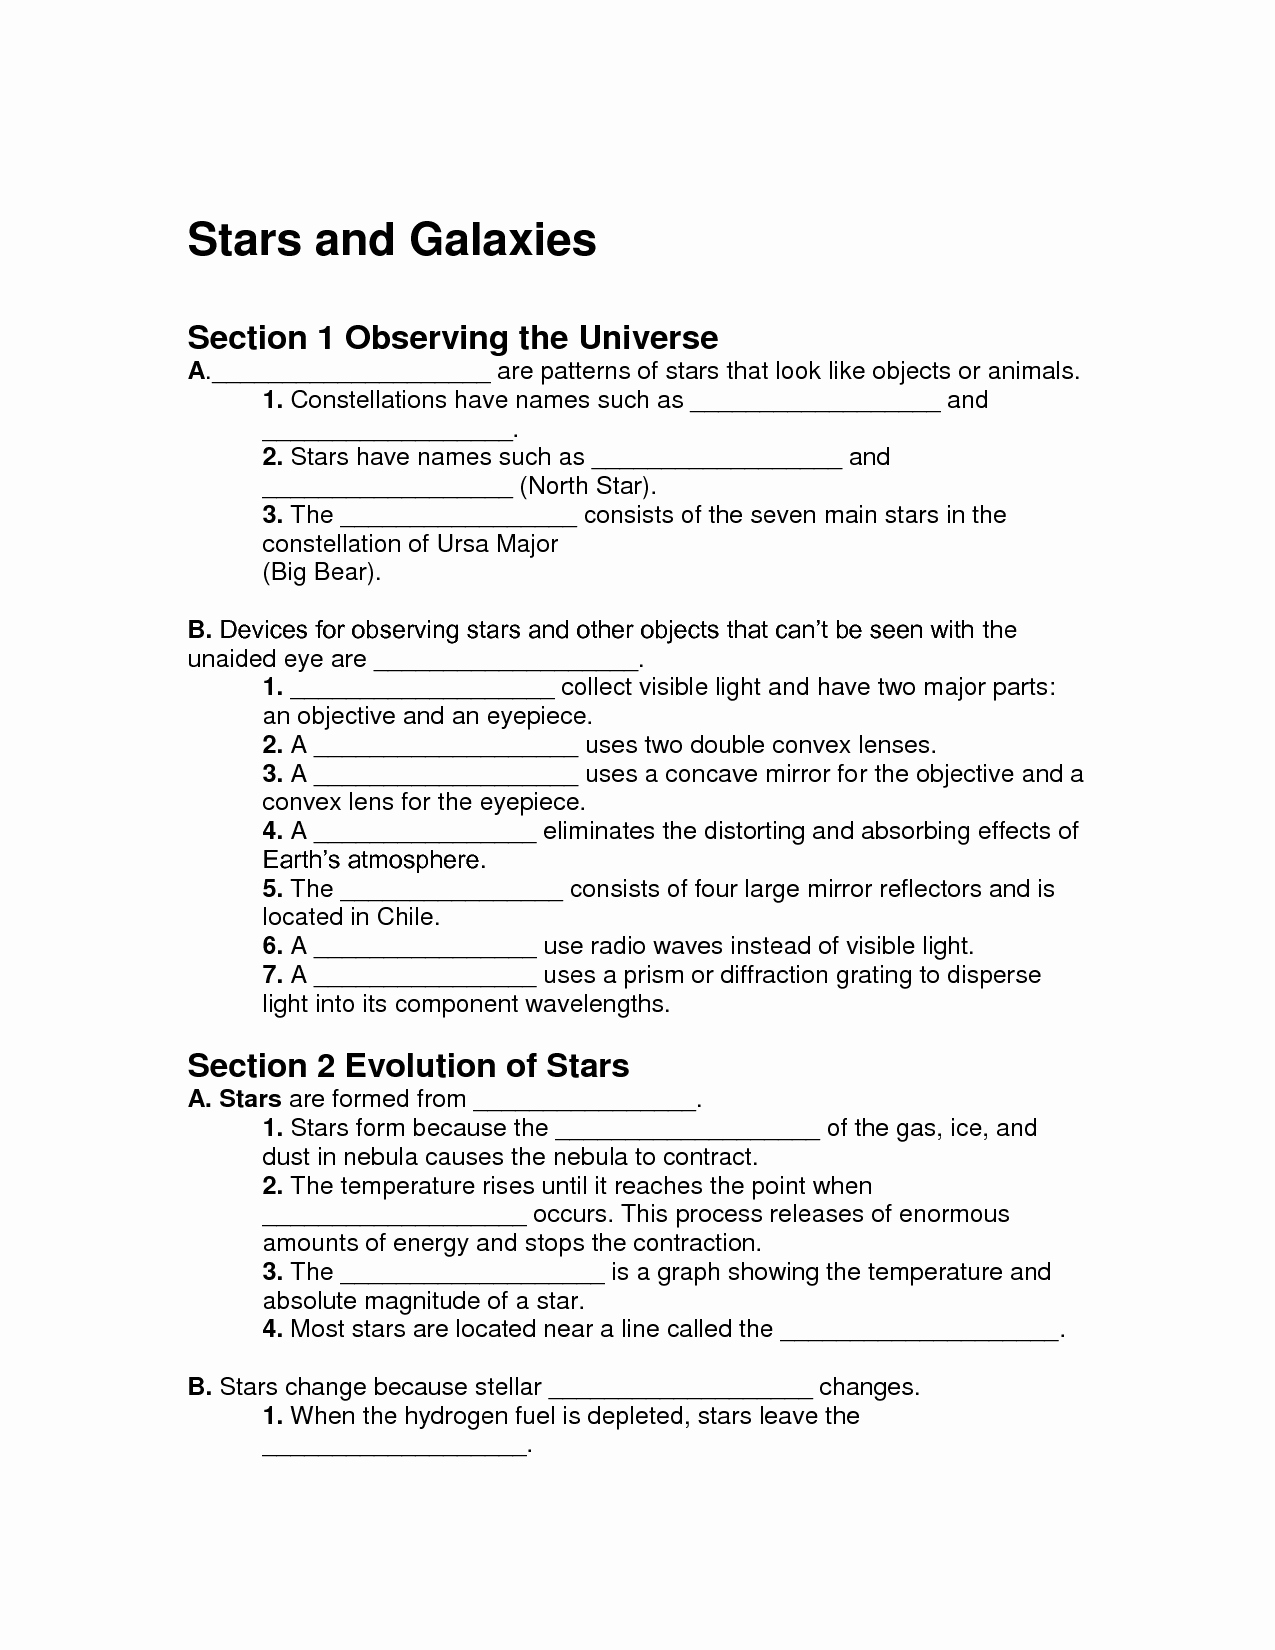 Stars and Galaxies Worksheet Answers Best Of Stars and Galaxies Note Taking Worksheet Answers